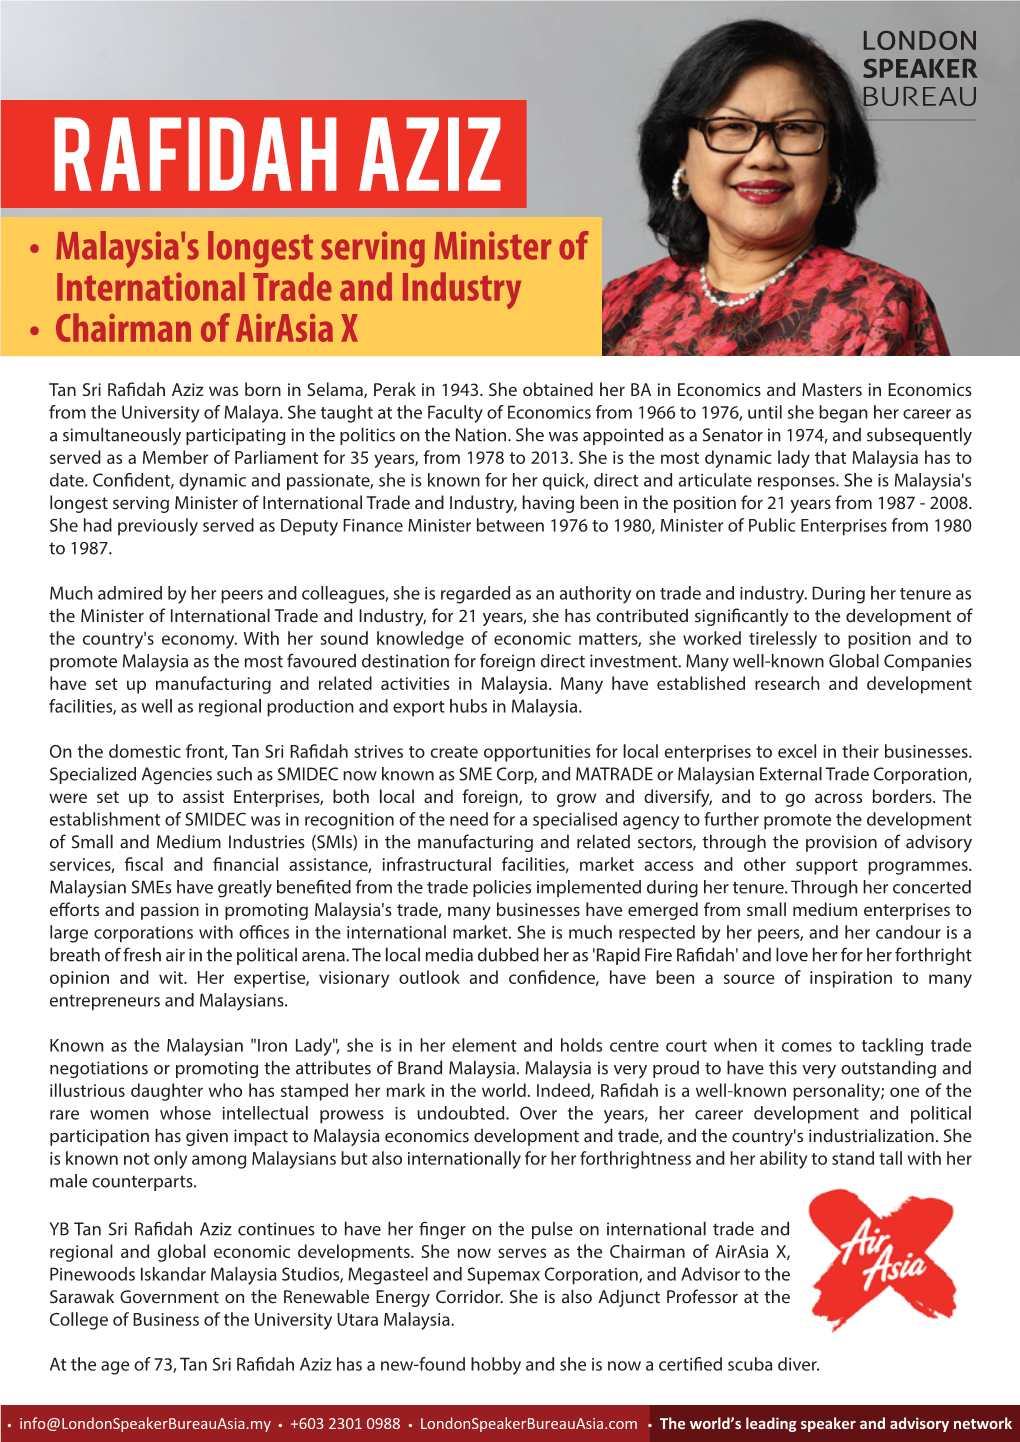 RAFIDAH AZIZ • Malaysia's Longest Serving Minister of International Trade and Industry • Chairman of Airasia X